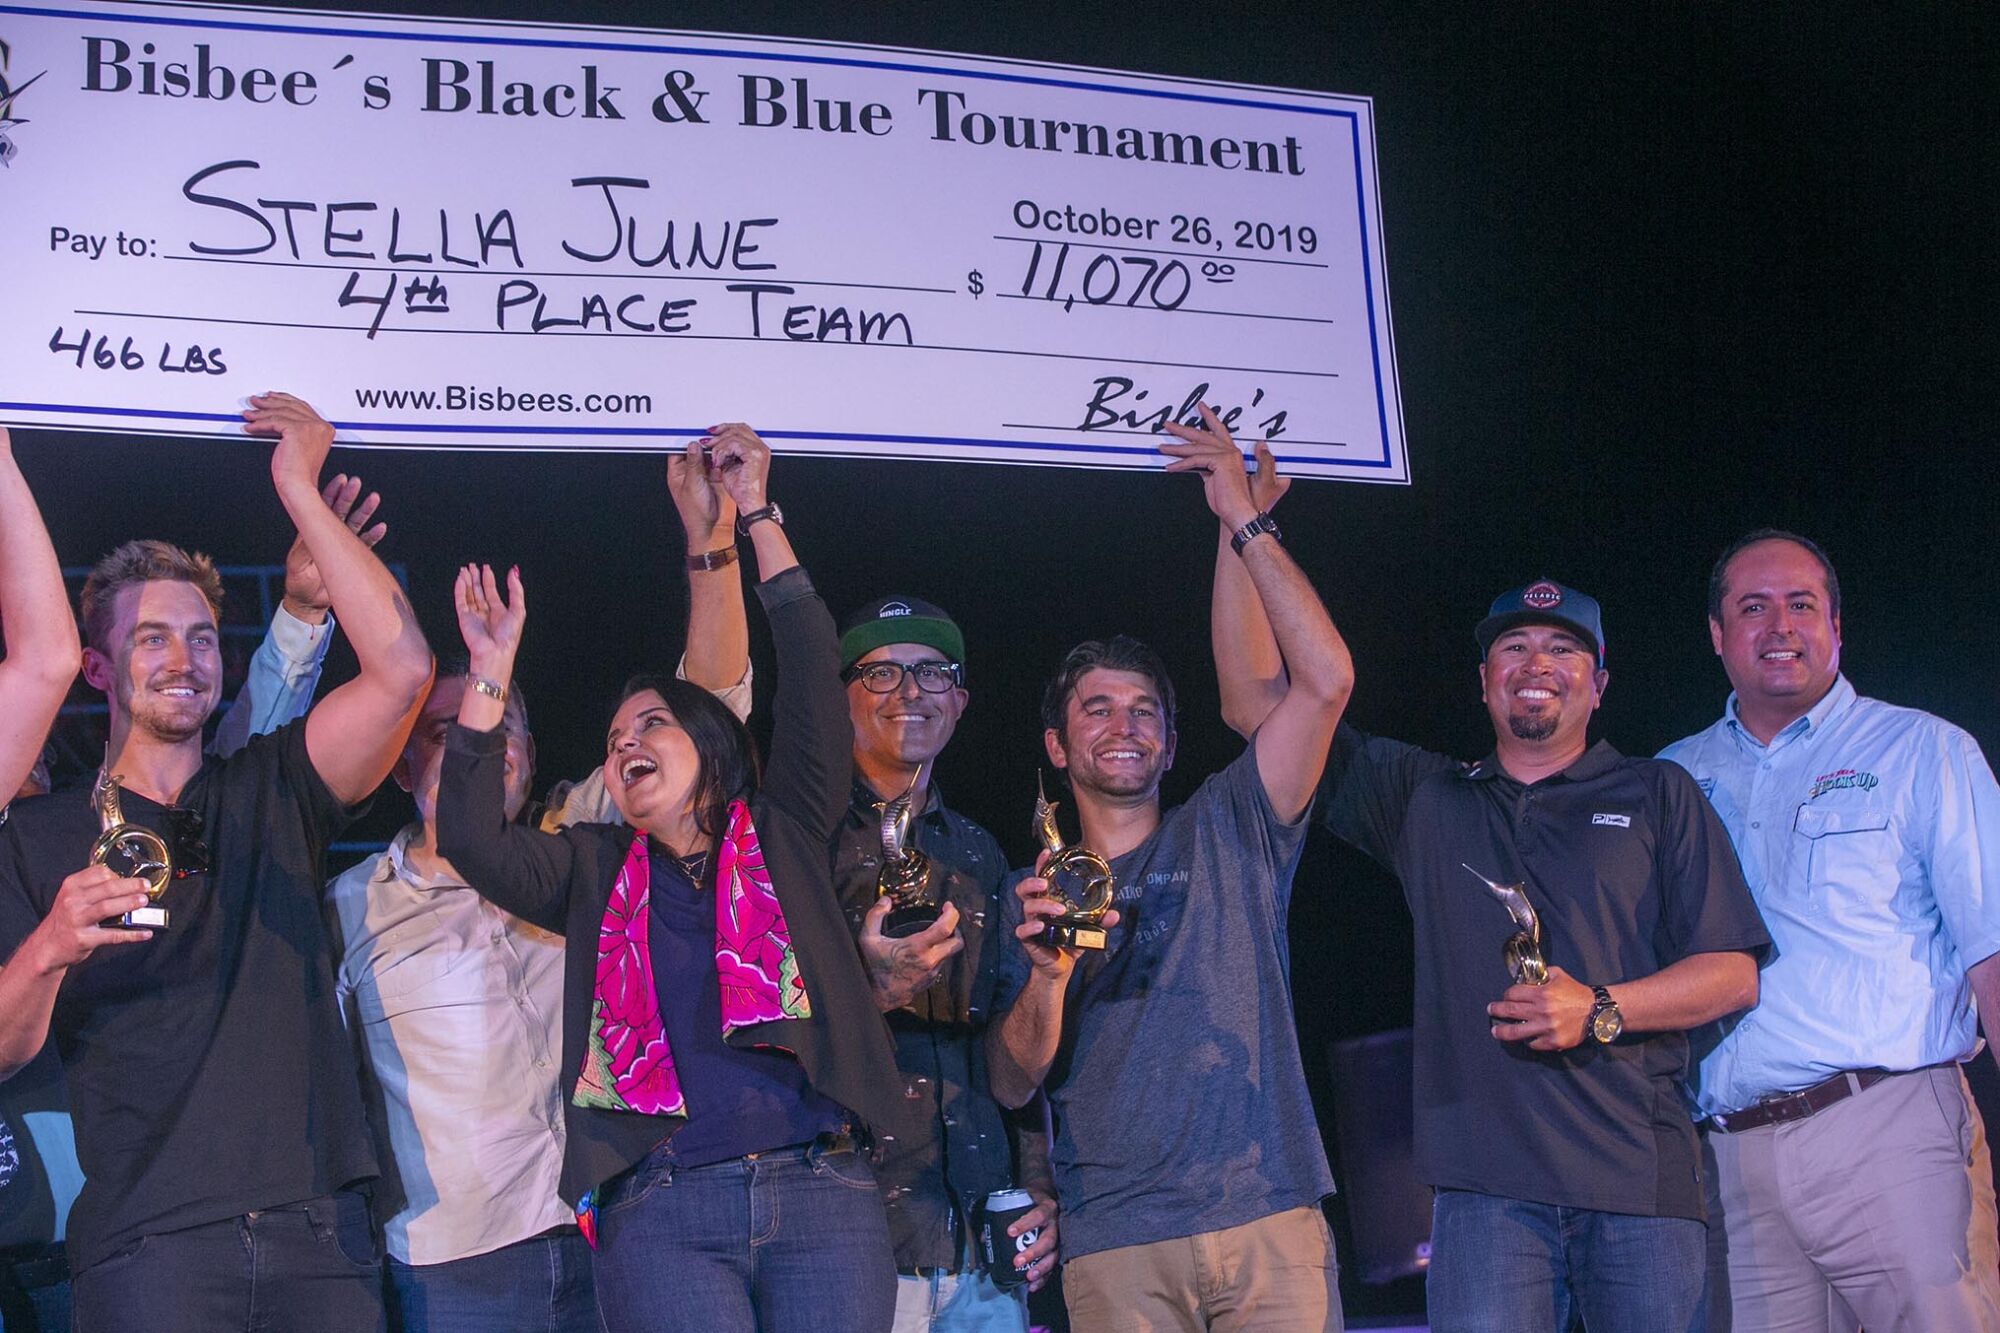 Team members of the Stella June and local dignitaries celebrate as they held up a giant check for $11,070, for a fourth place finish in the Bisbee Black & Blue marlin fishing tournament.